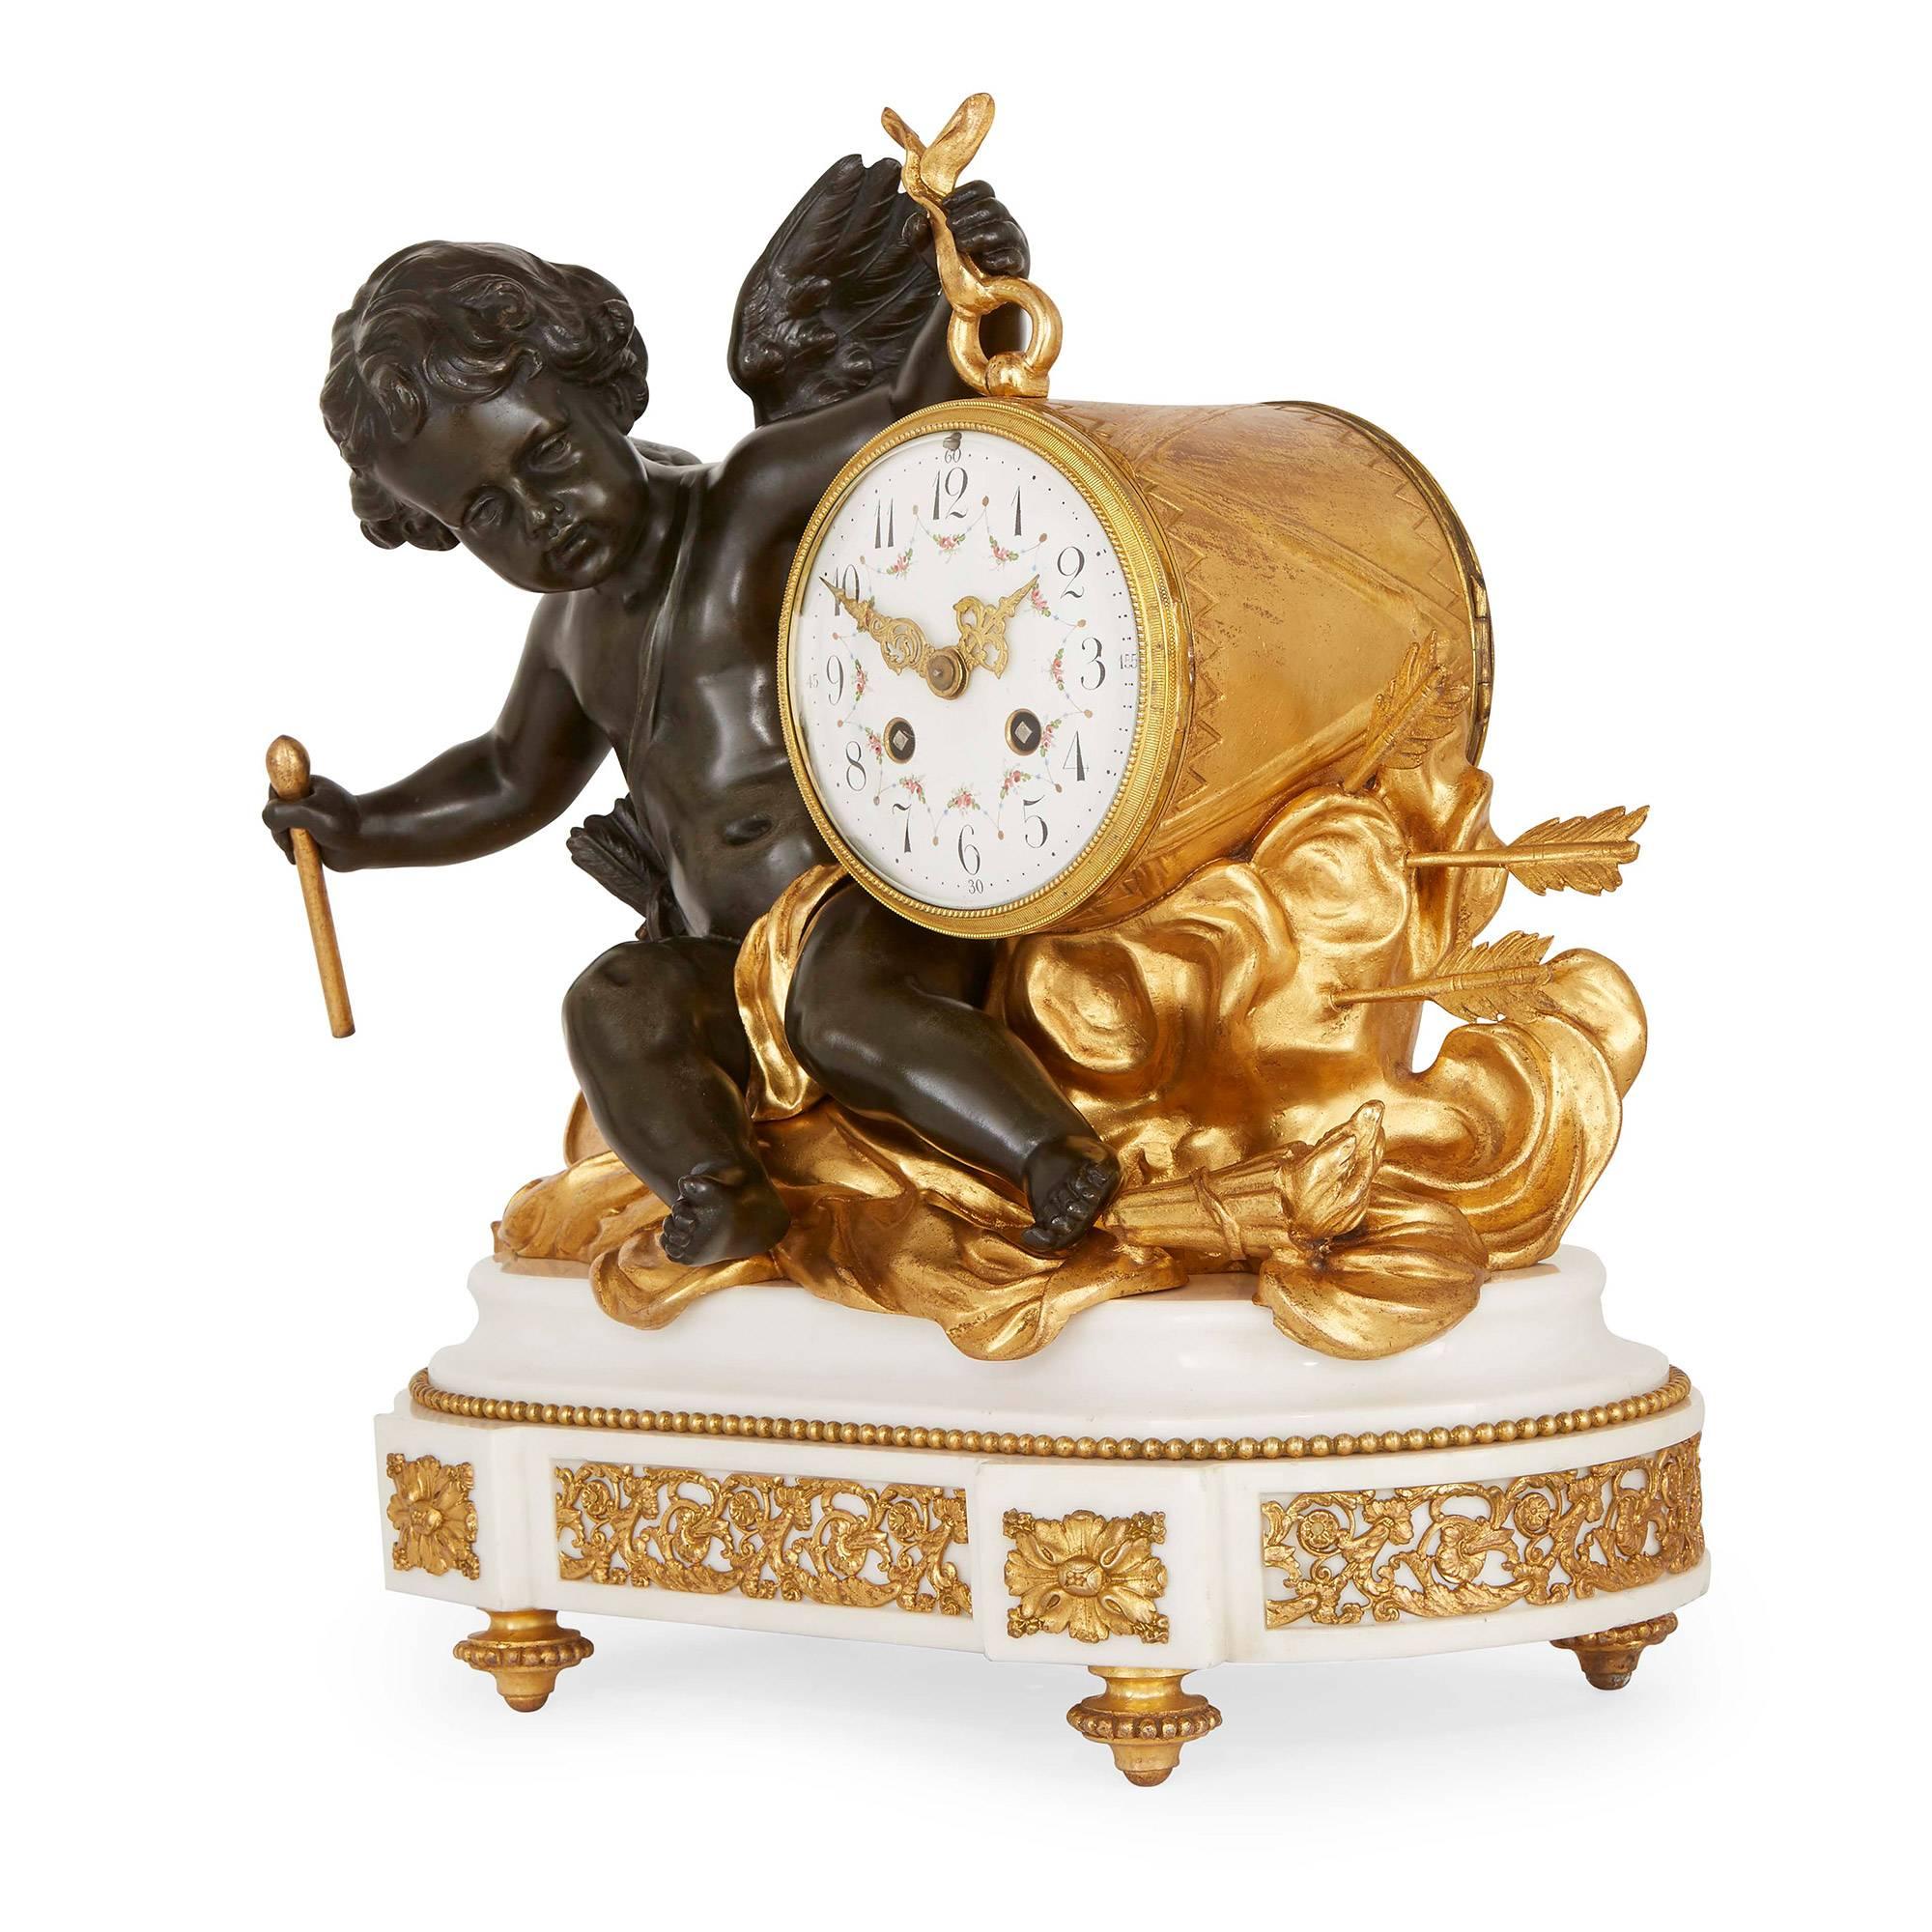 Comprising a central clock and a pair of flanking twin light candelabra, the clock with a bronze putto holding the clock and seated upon various ormolu decorations above an ormolu mounted white marble base, the pair of candelabra similarly